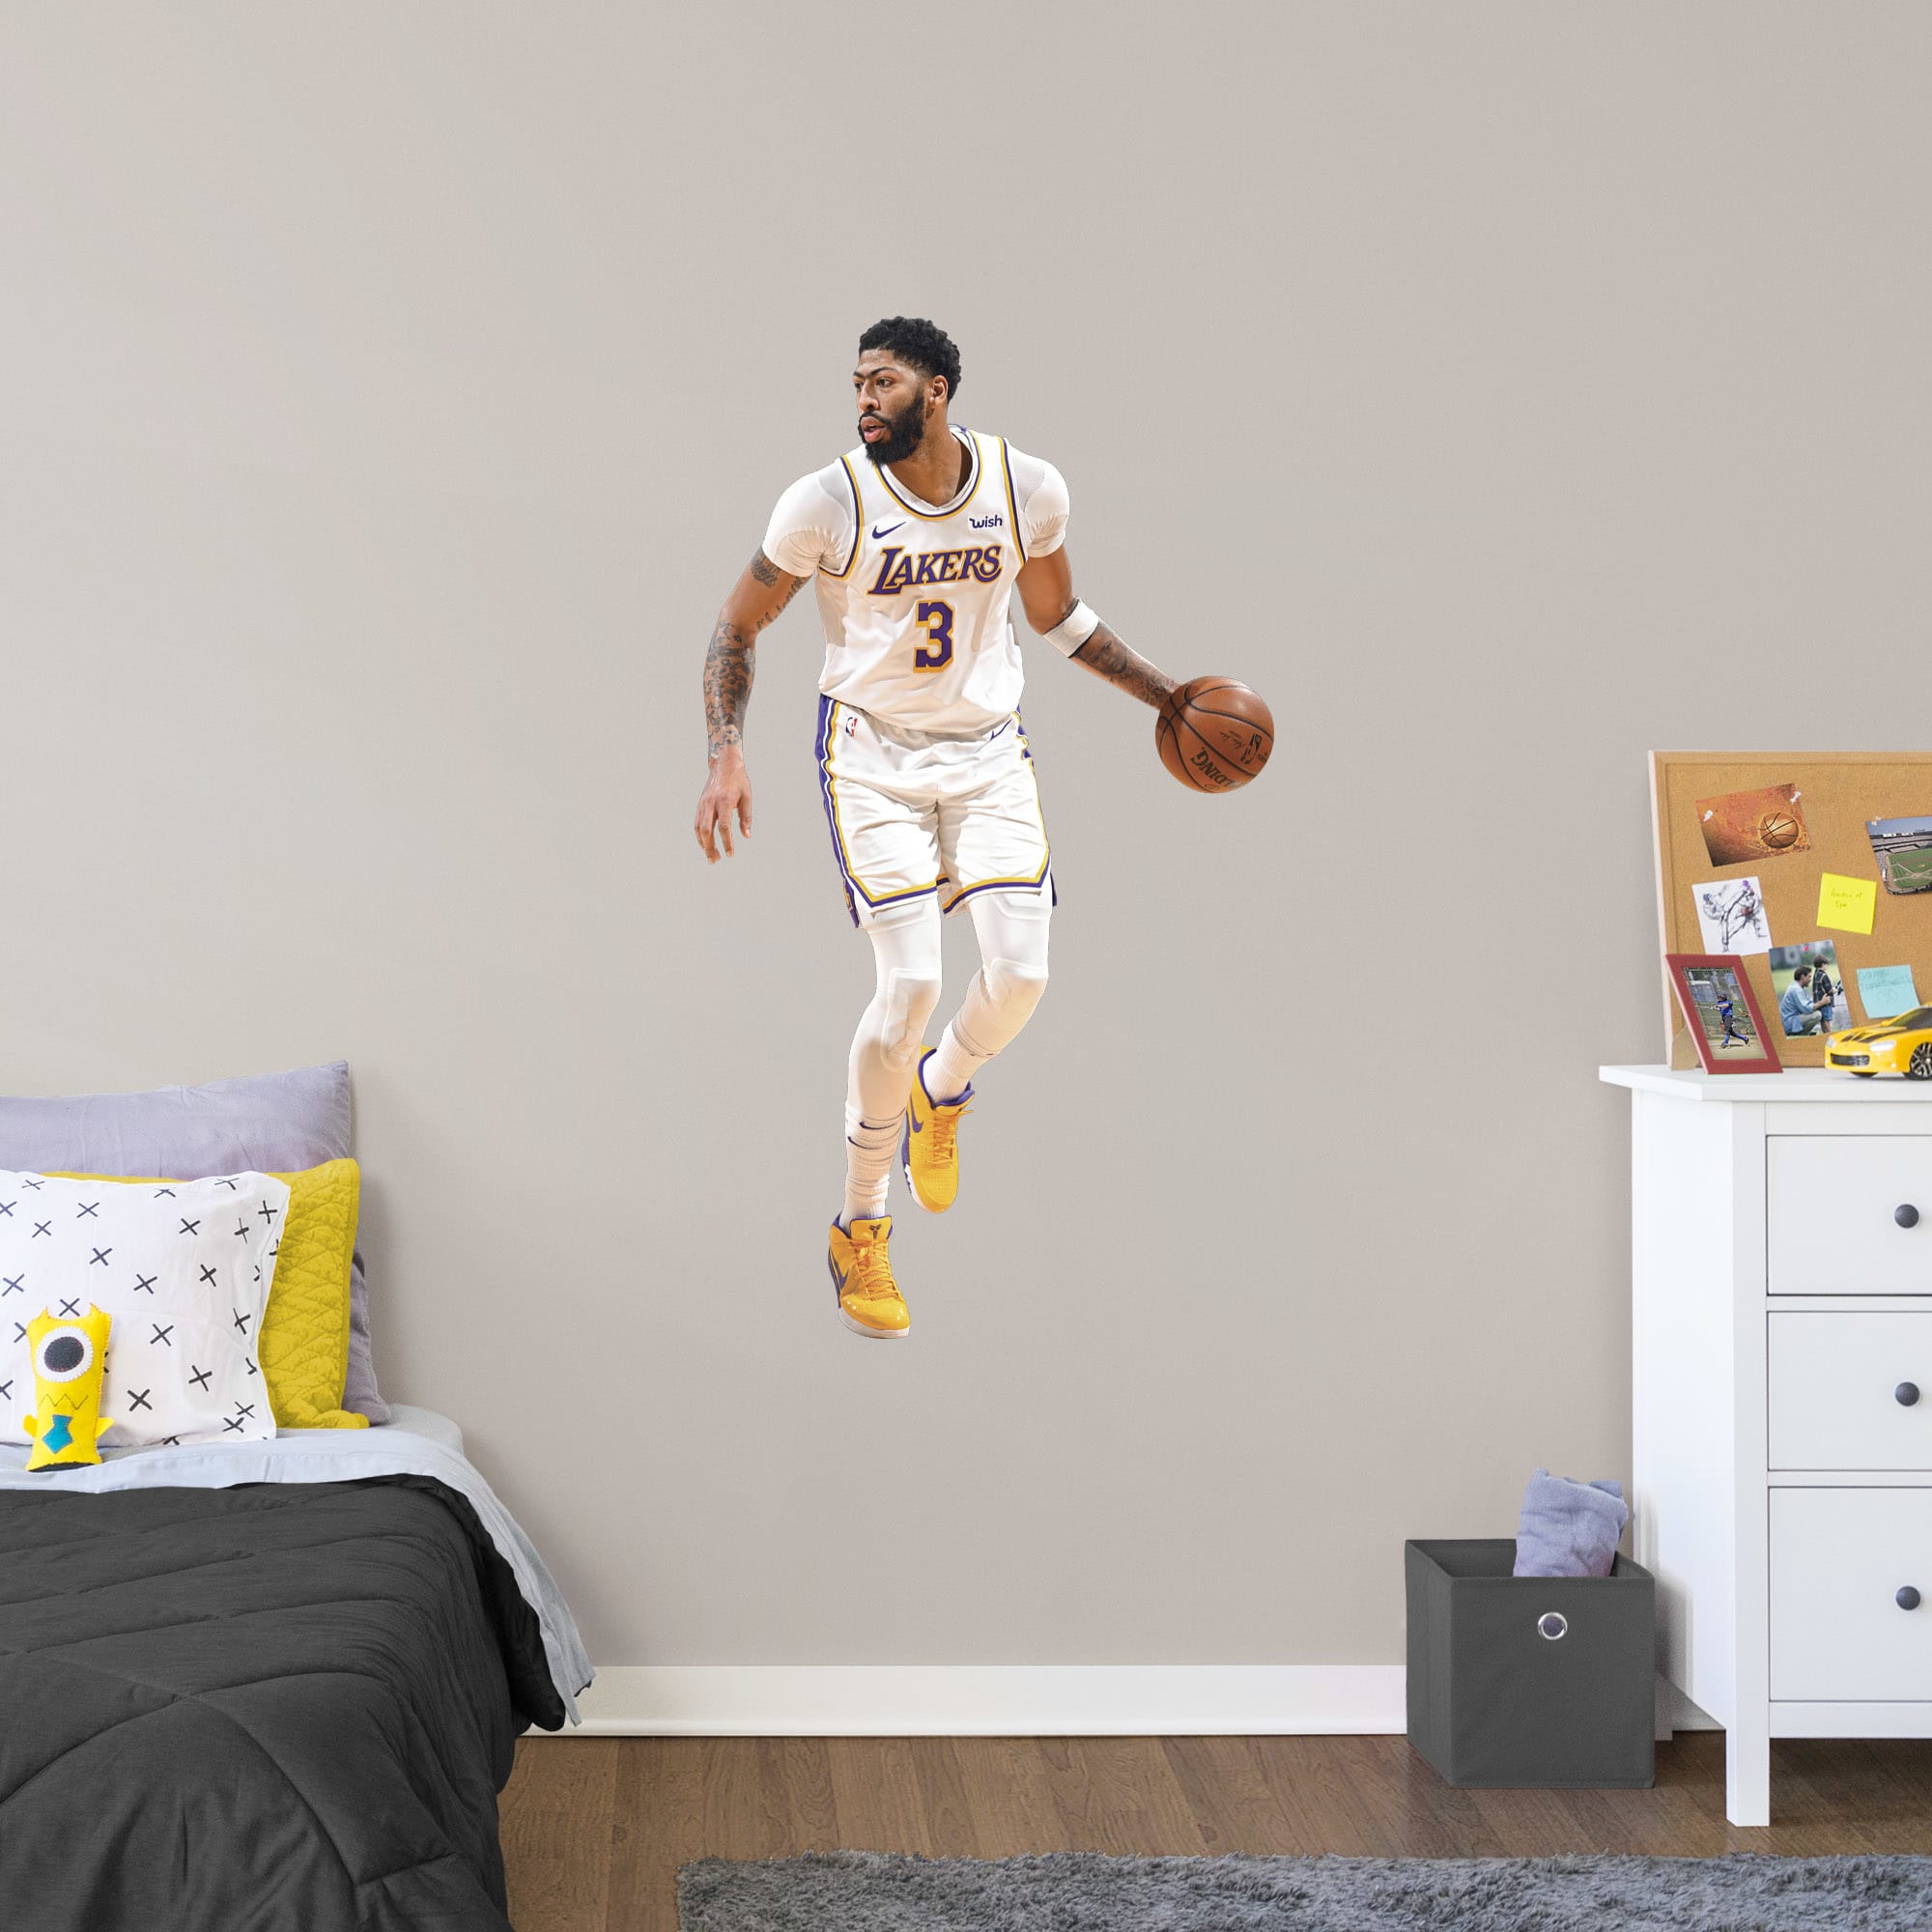 Anthony Davis for Los Angeles Lakers - Officially Licensed NBA Removable Wall Decal Giant Athlete + 2 Decals (29"W x 51"H) by Fa